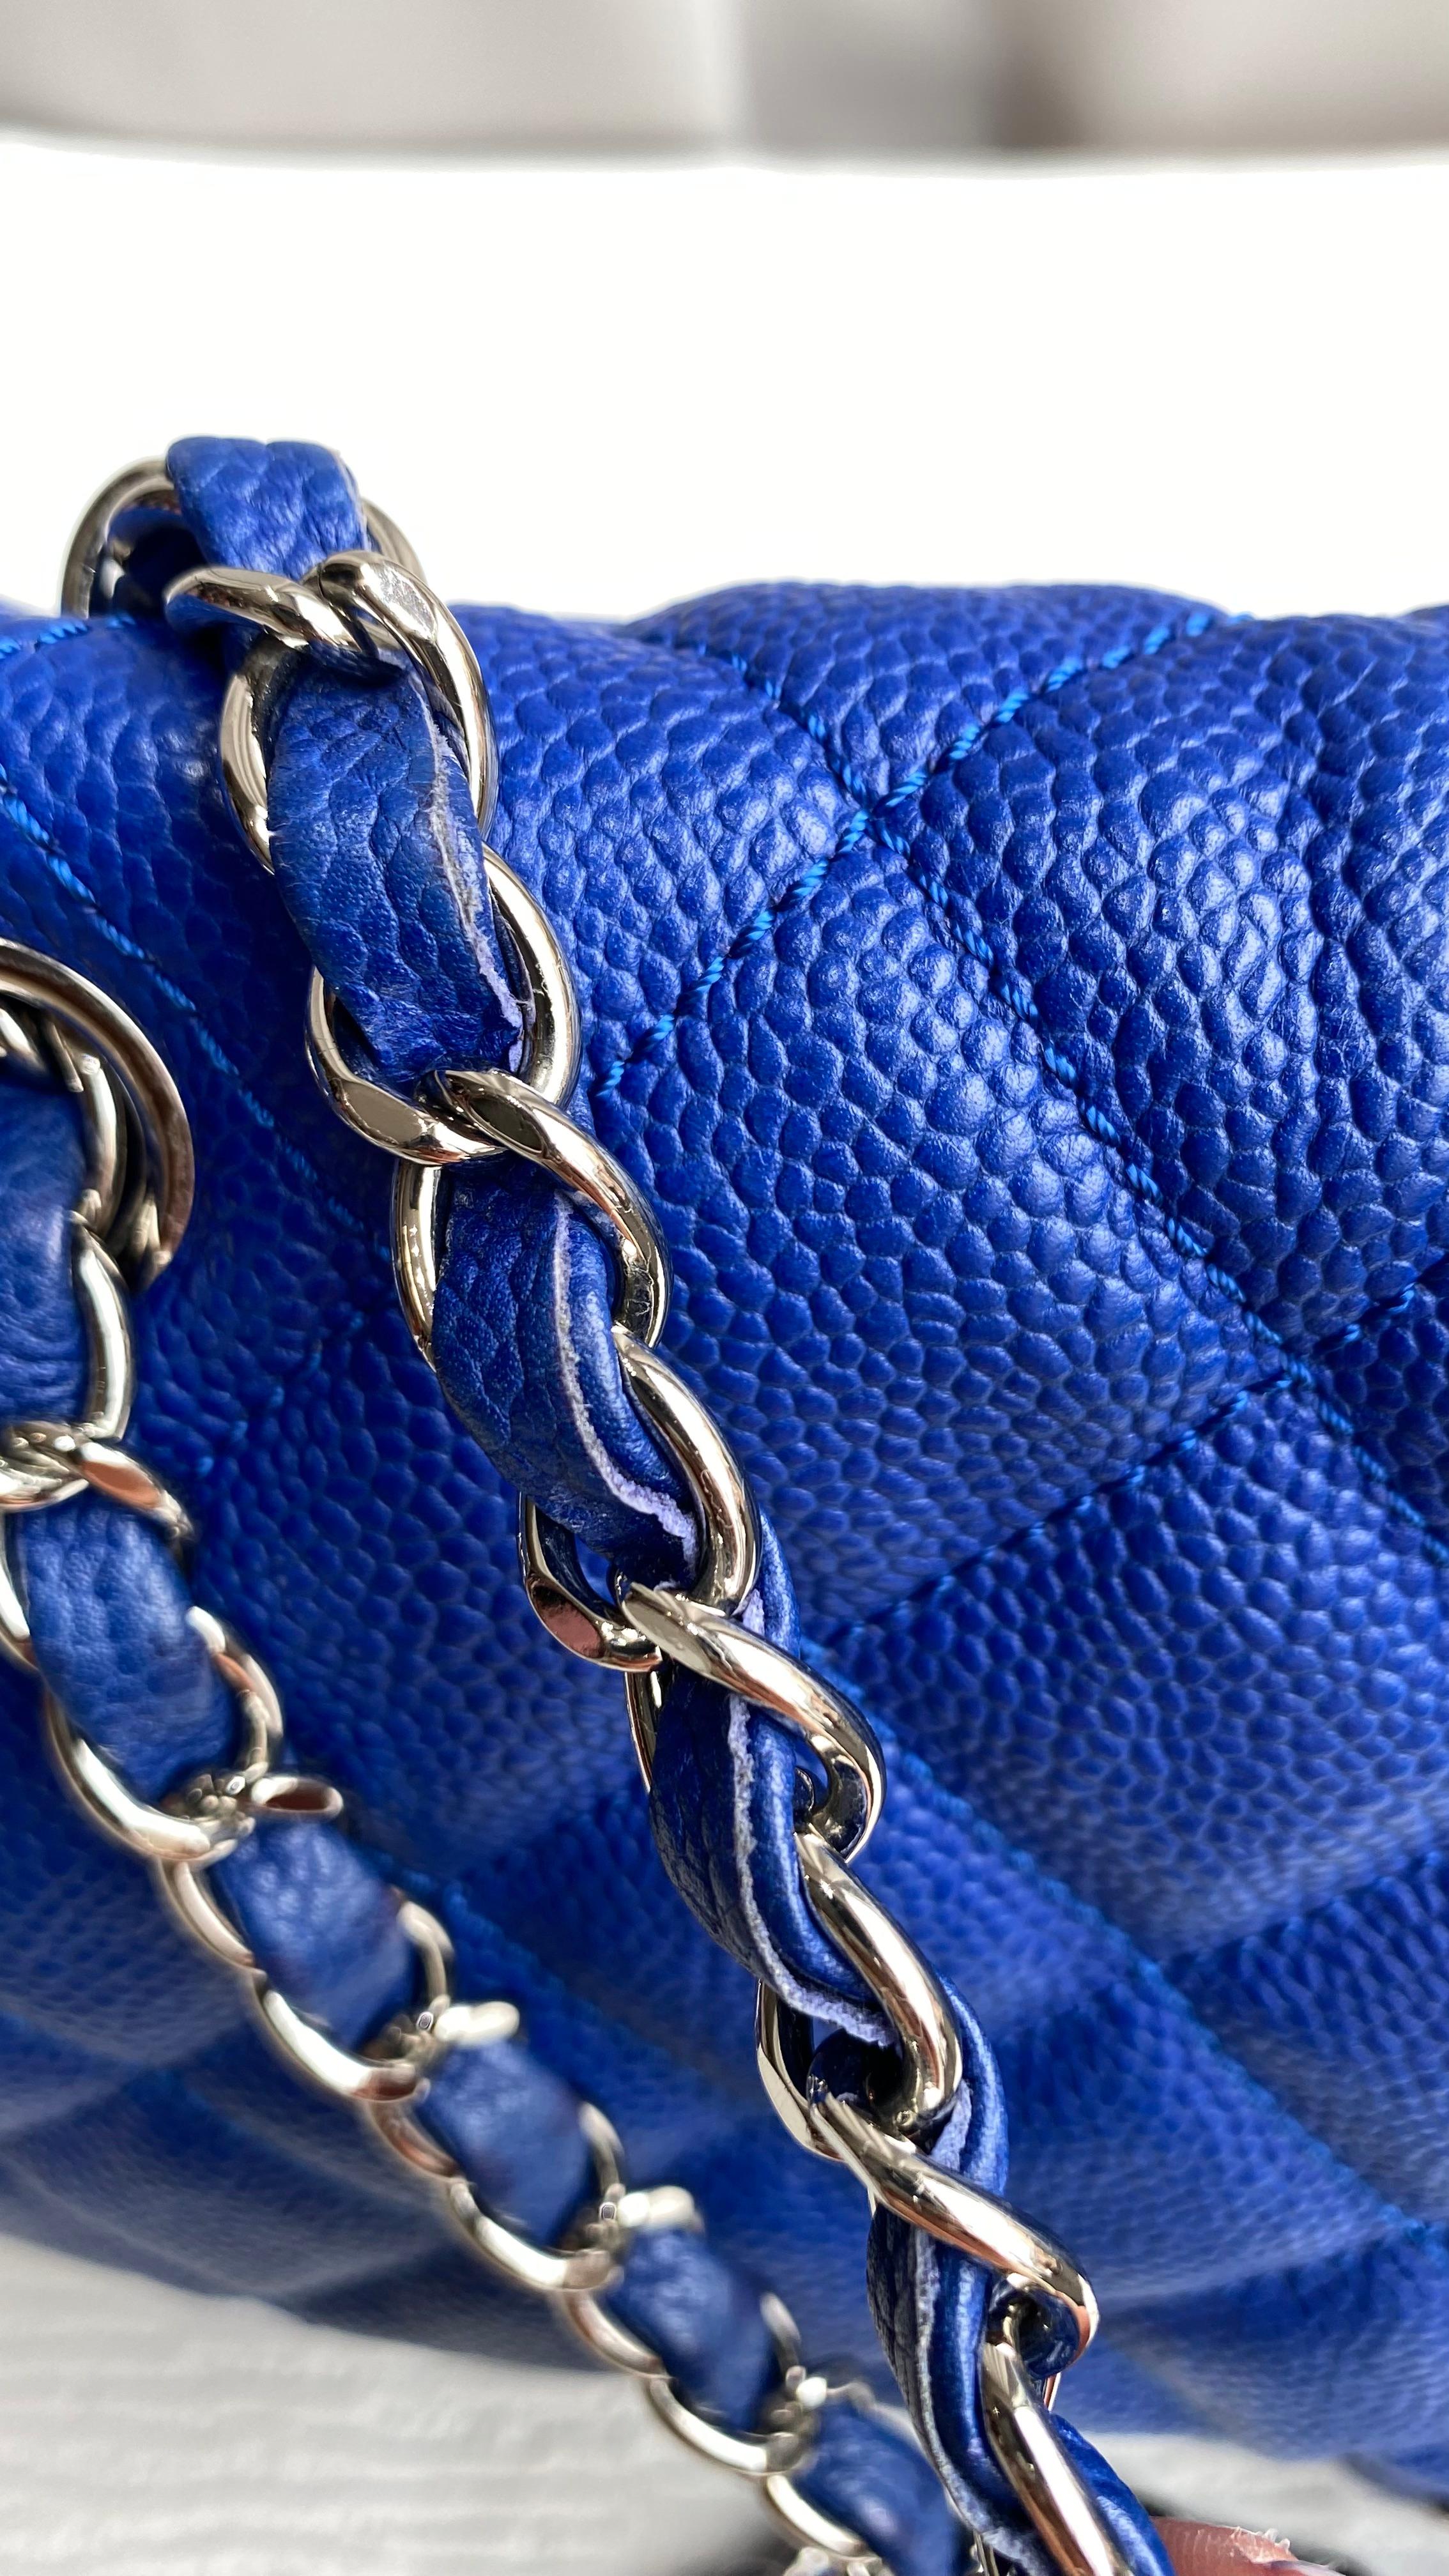 This Chanel Navy Chanel Quilted Jumbo Bag is a classic and timeless piece that is sure to add a touch of luxury to any outfit. It is made from high-quality navy blue caviar leather and features a beautiful quilted design. The bag is in great